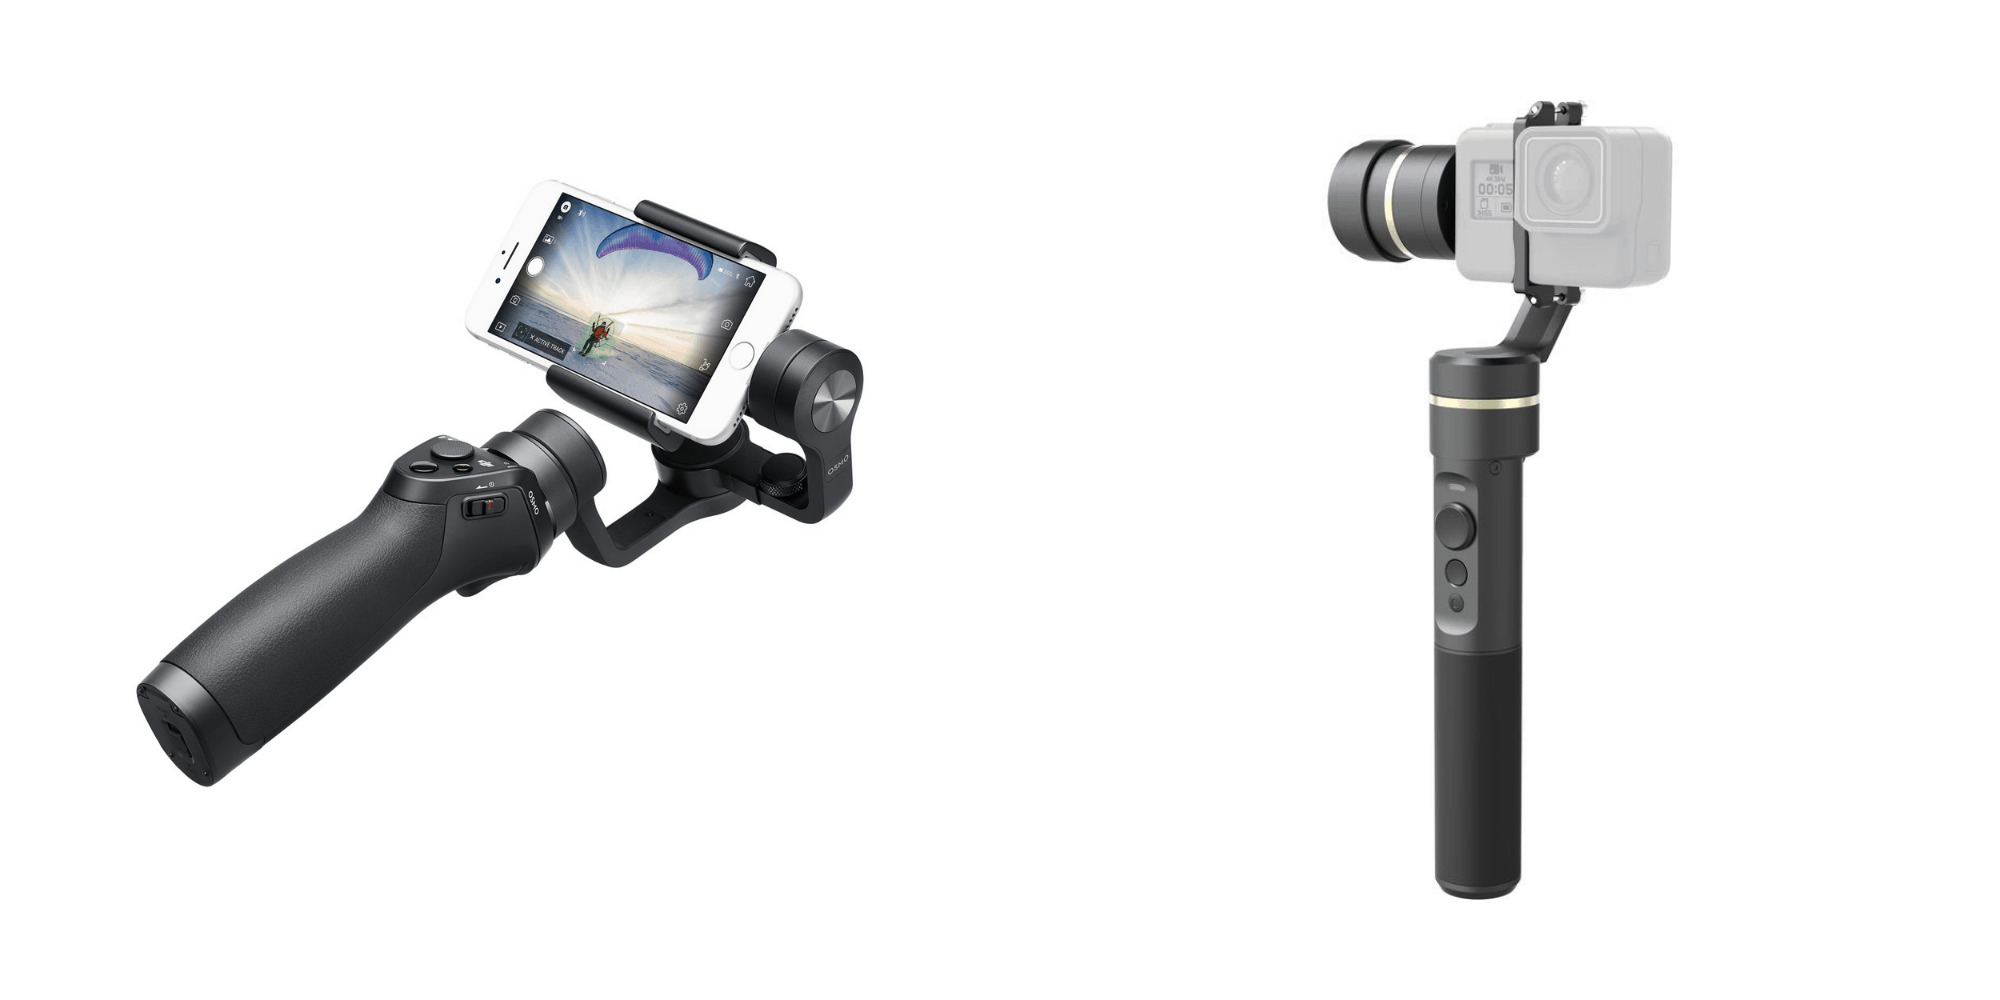 Demystifying Gimbals: Understanding Their Purpose And Function